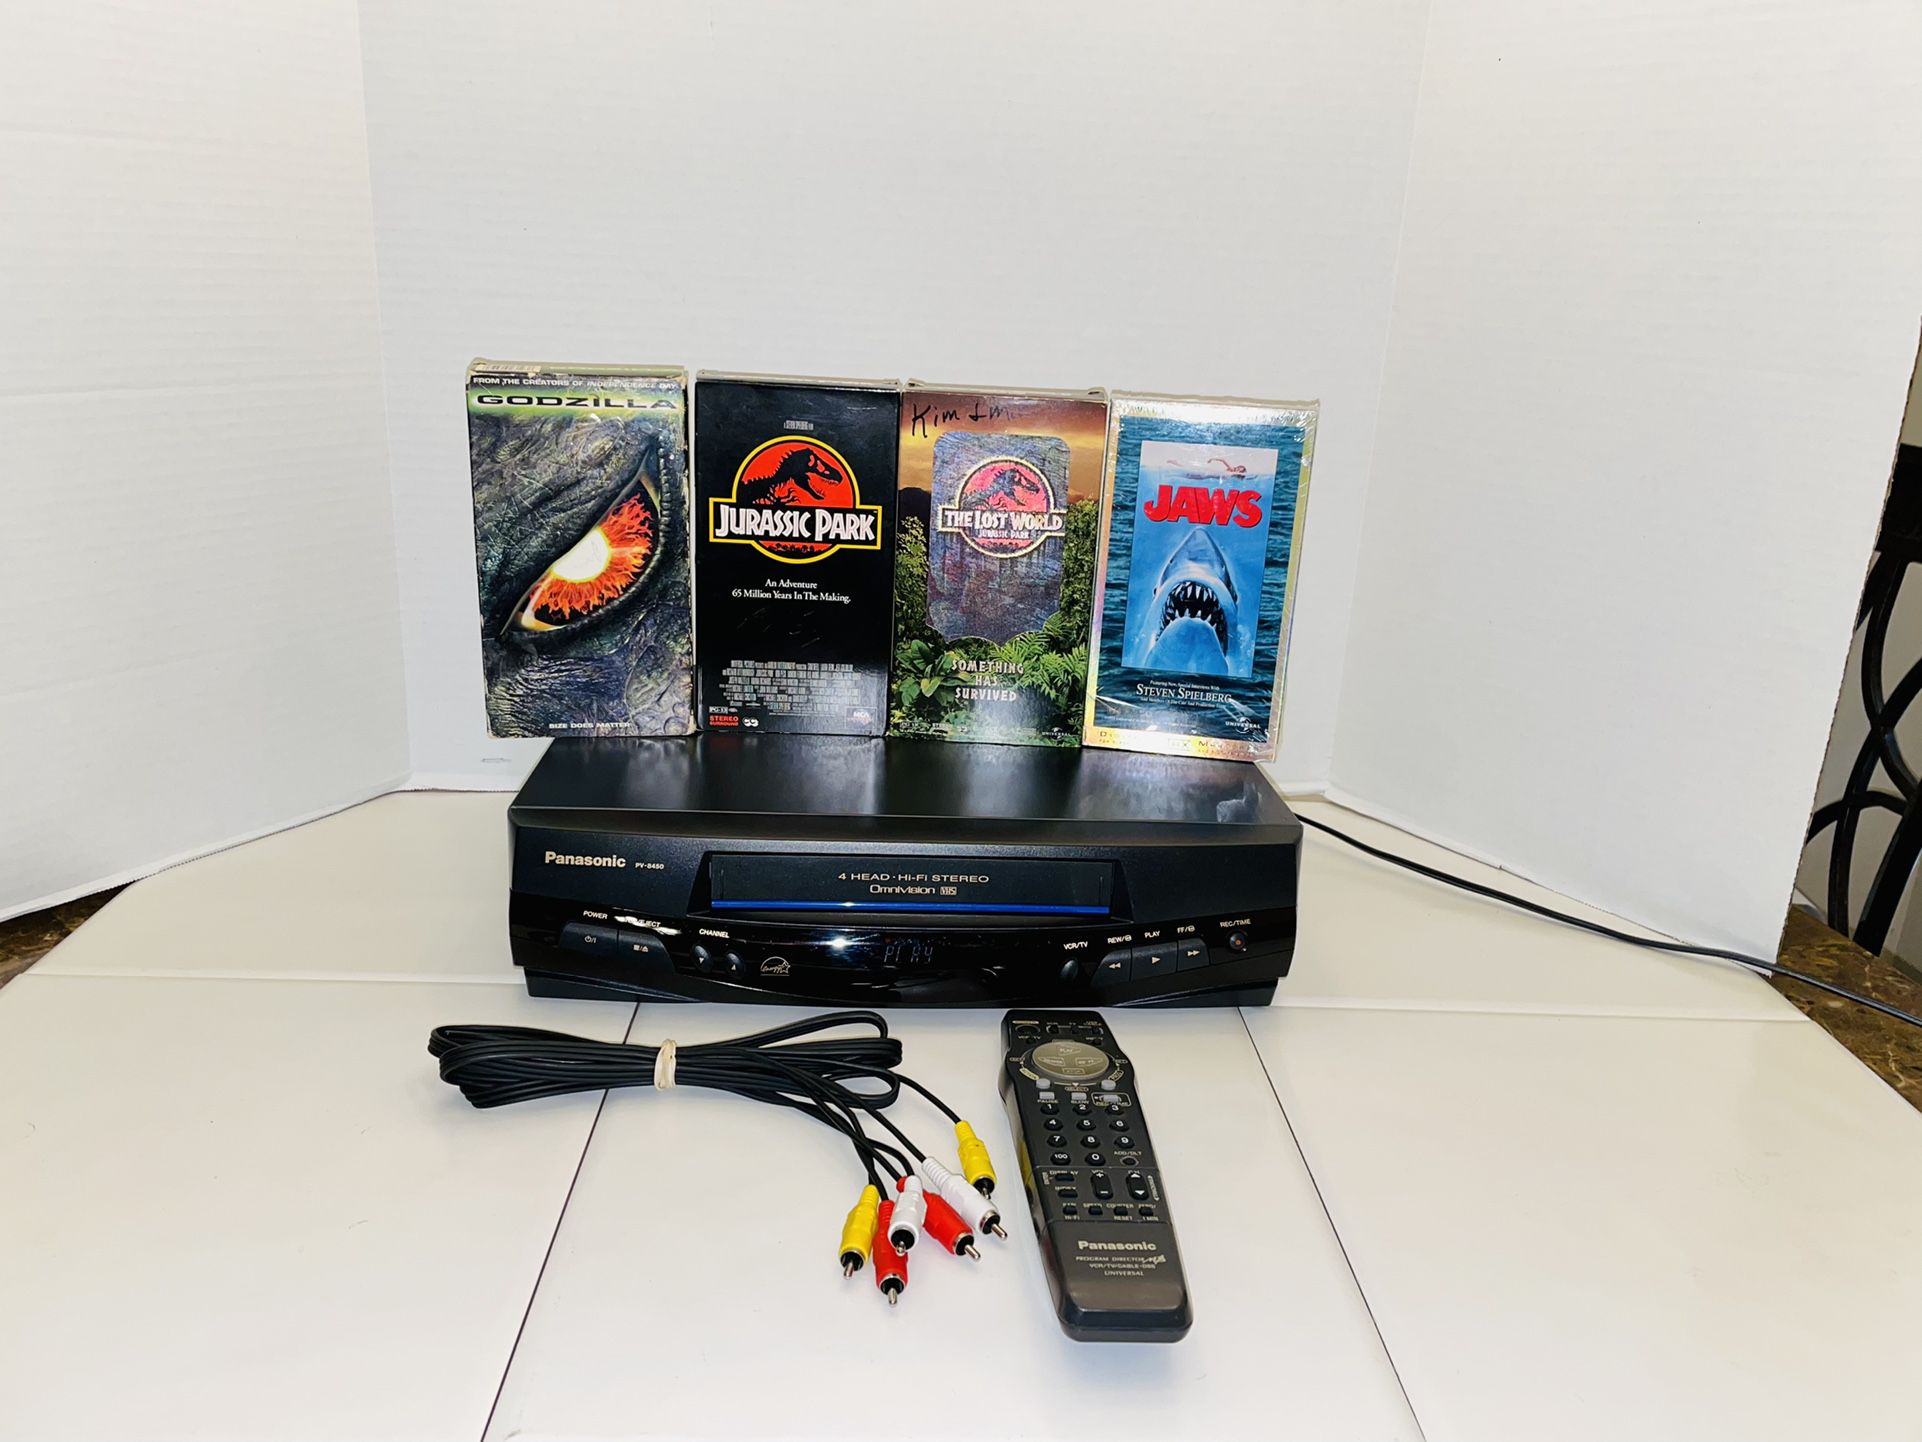 Panasonic PV-8450 Omnivision 4-Head HI-FI Stereo VCR VHS Player Recorder Bundle With Remote & VHS Movies